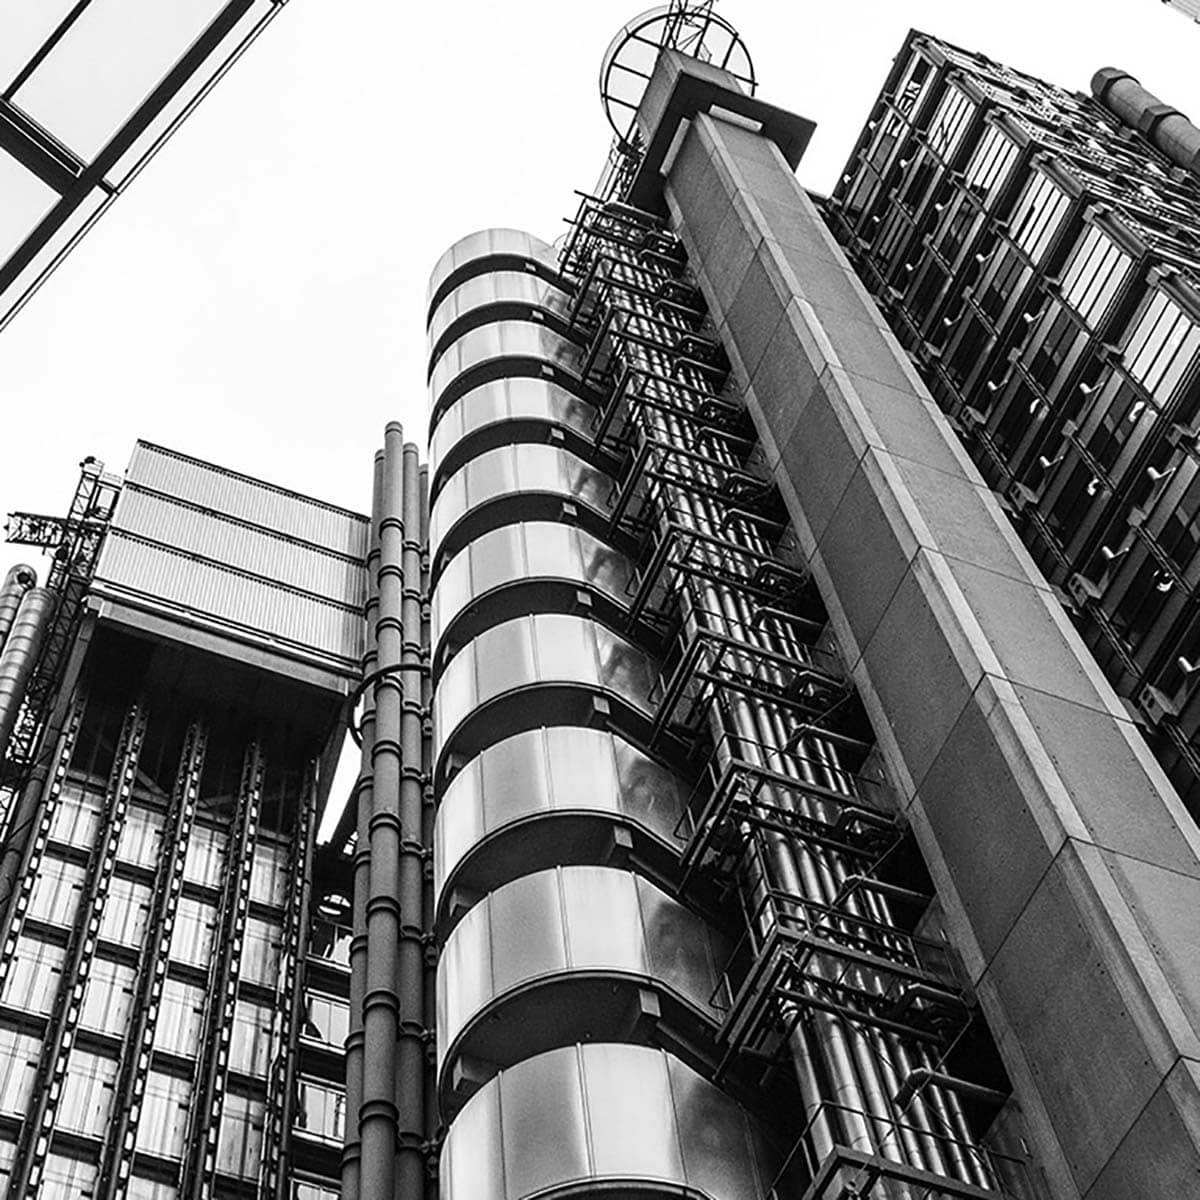 Lloyd’s proposed transfer of certain EEA insurance business to Lloyd’s Brussels